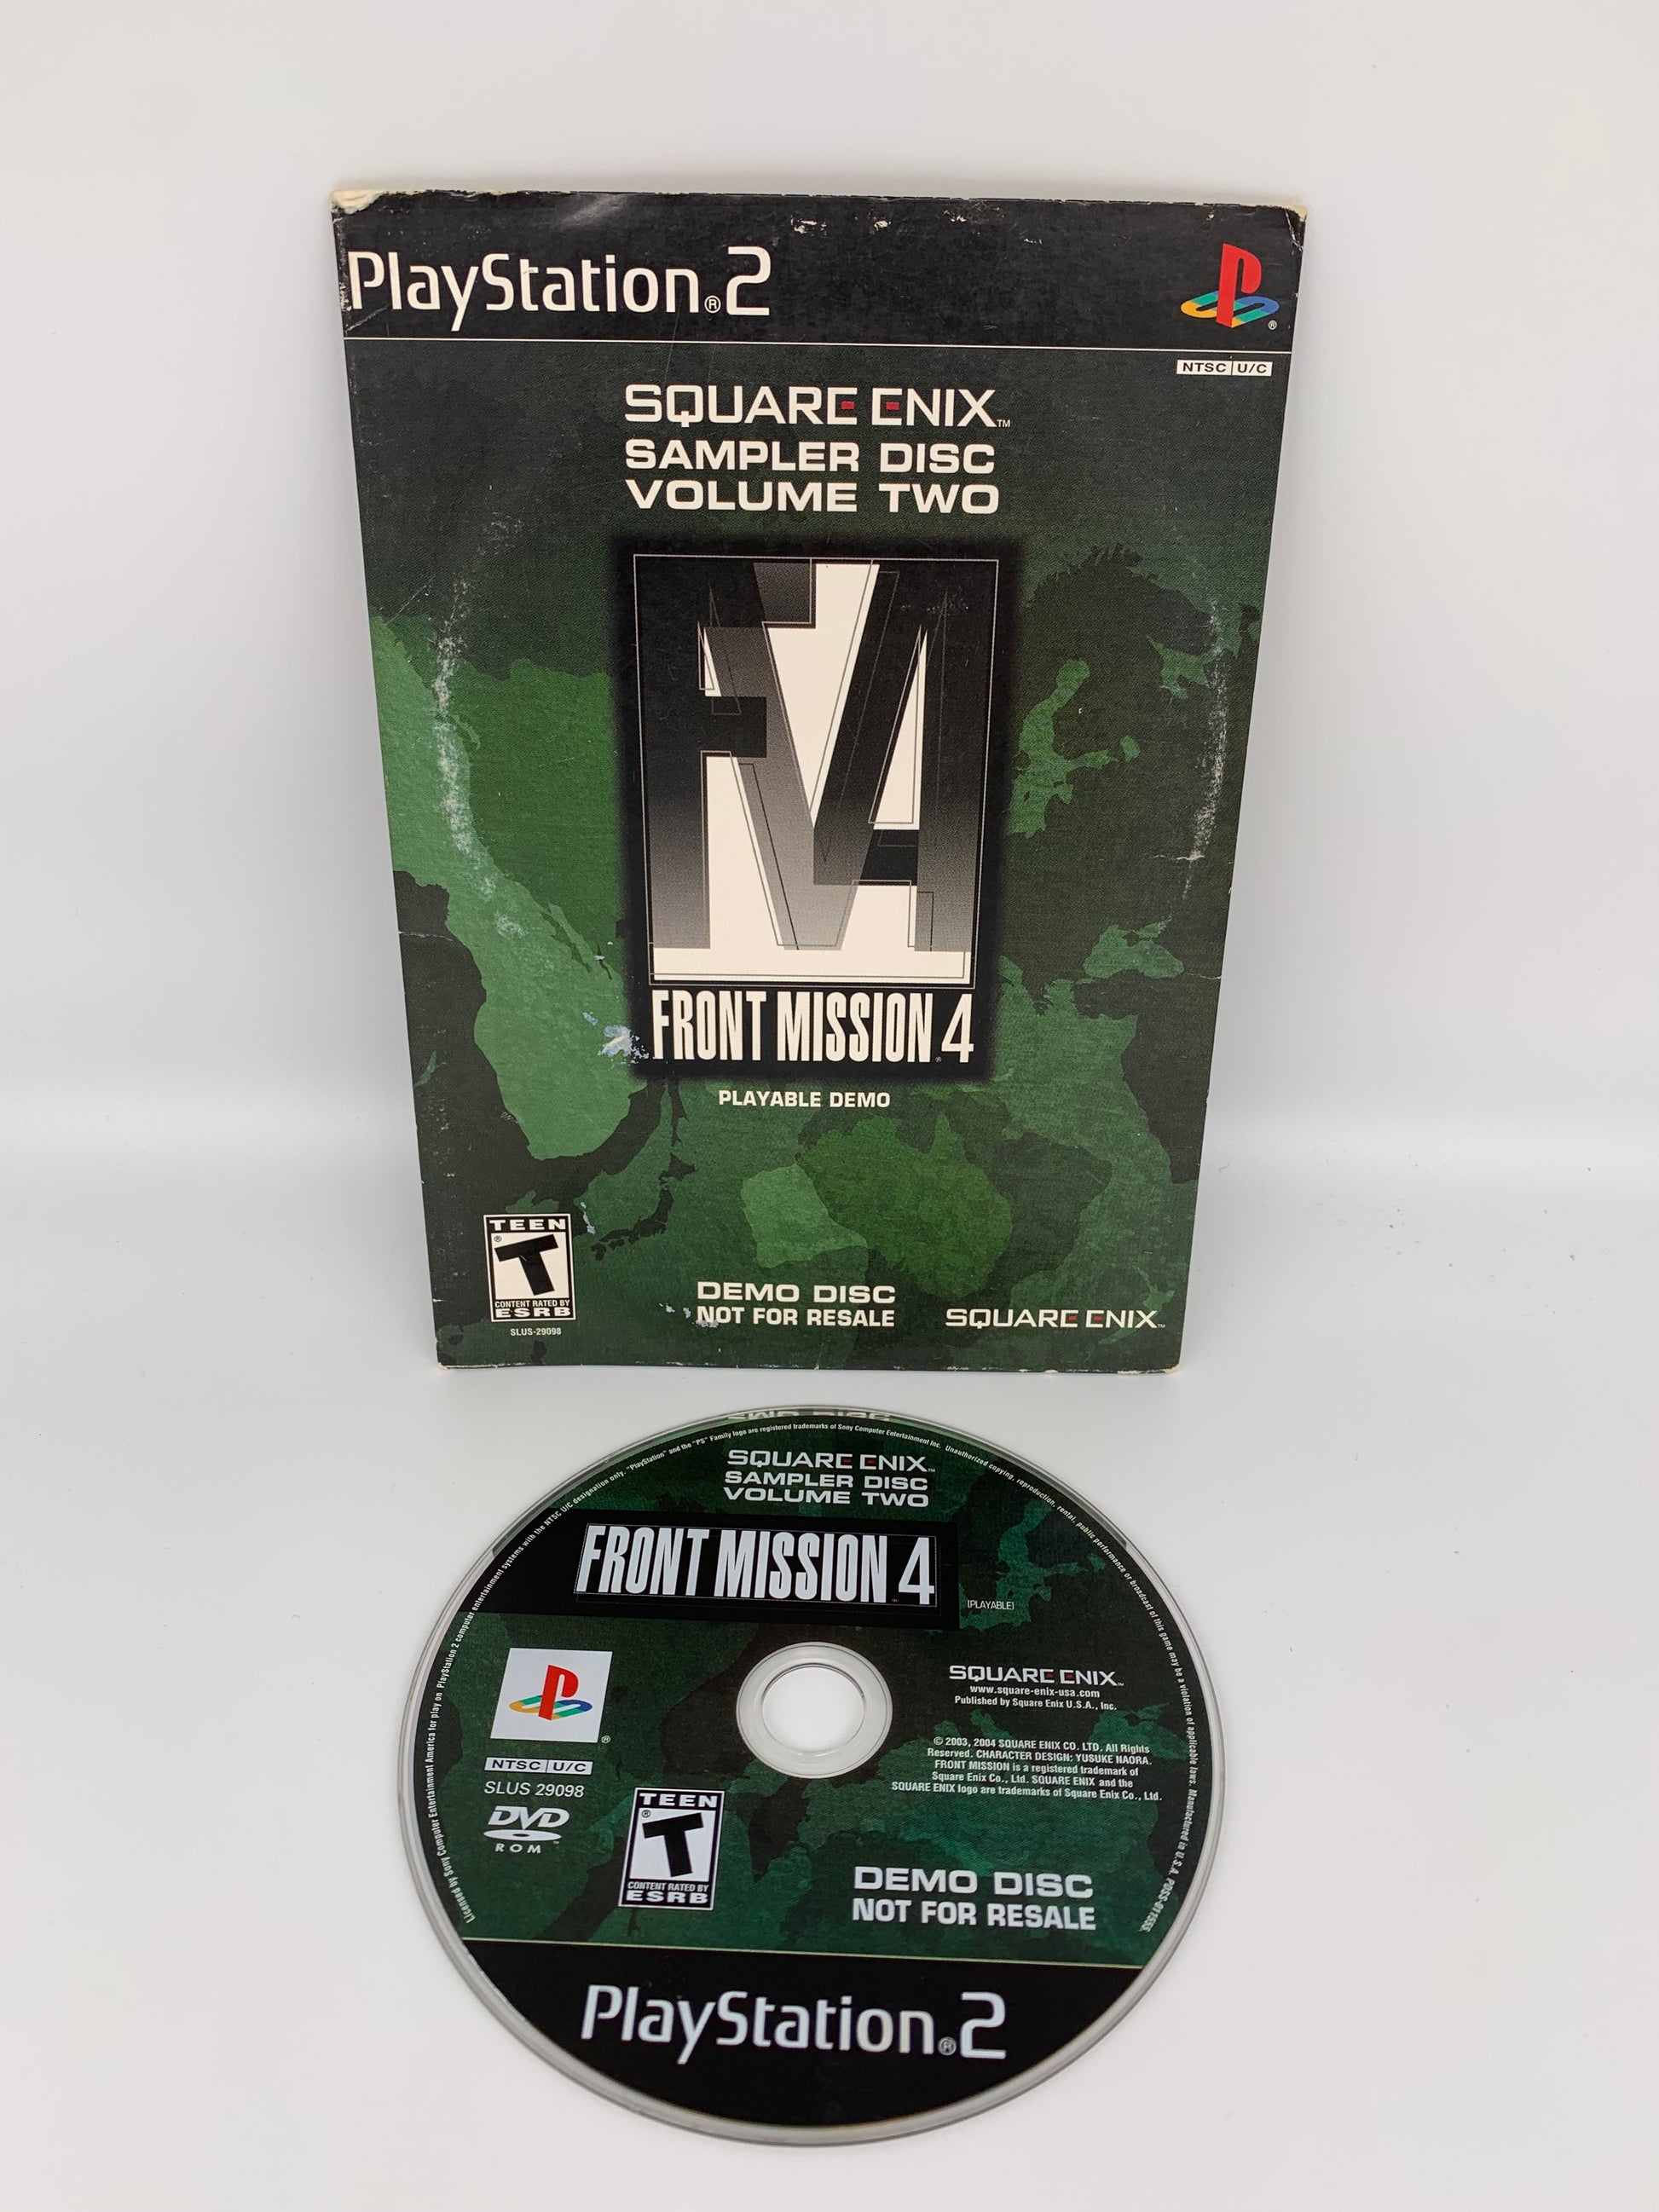 PiXEL-RETRO.COM : SONY PLAYSTATION 2 (PS2) COMPLET CIB BOX MANUAL GAME NTSC SQUARE ENiX SAMPLER DiSC FRONT MiSSiON 4 DEMO | NOT FOR RESALE volume 2